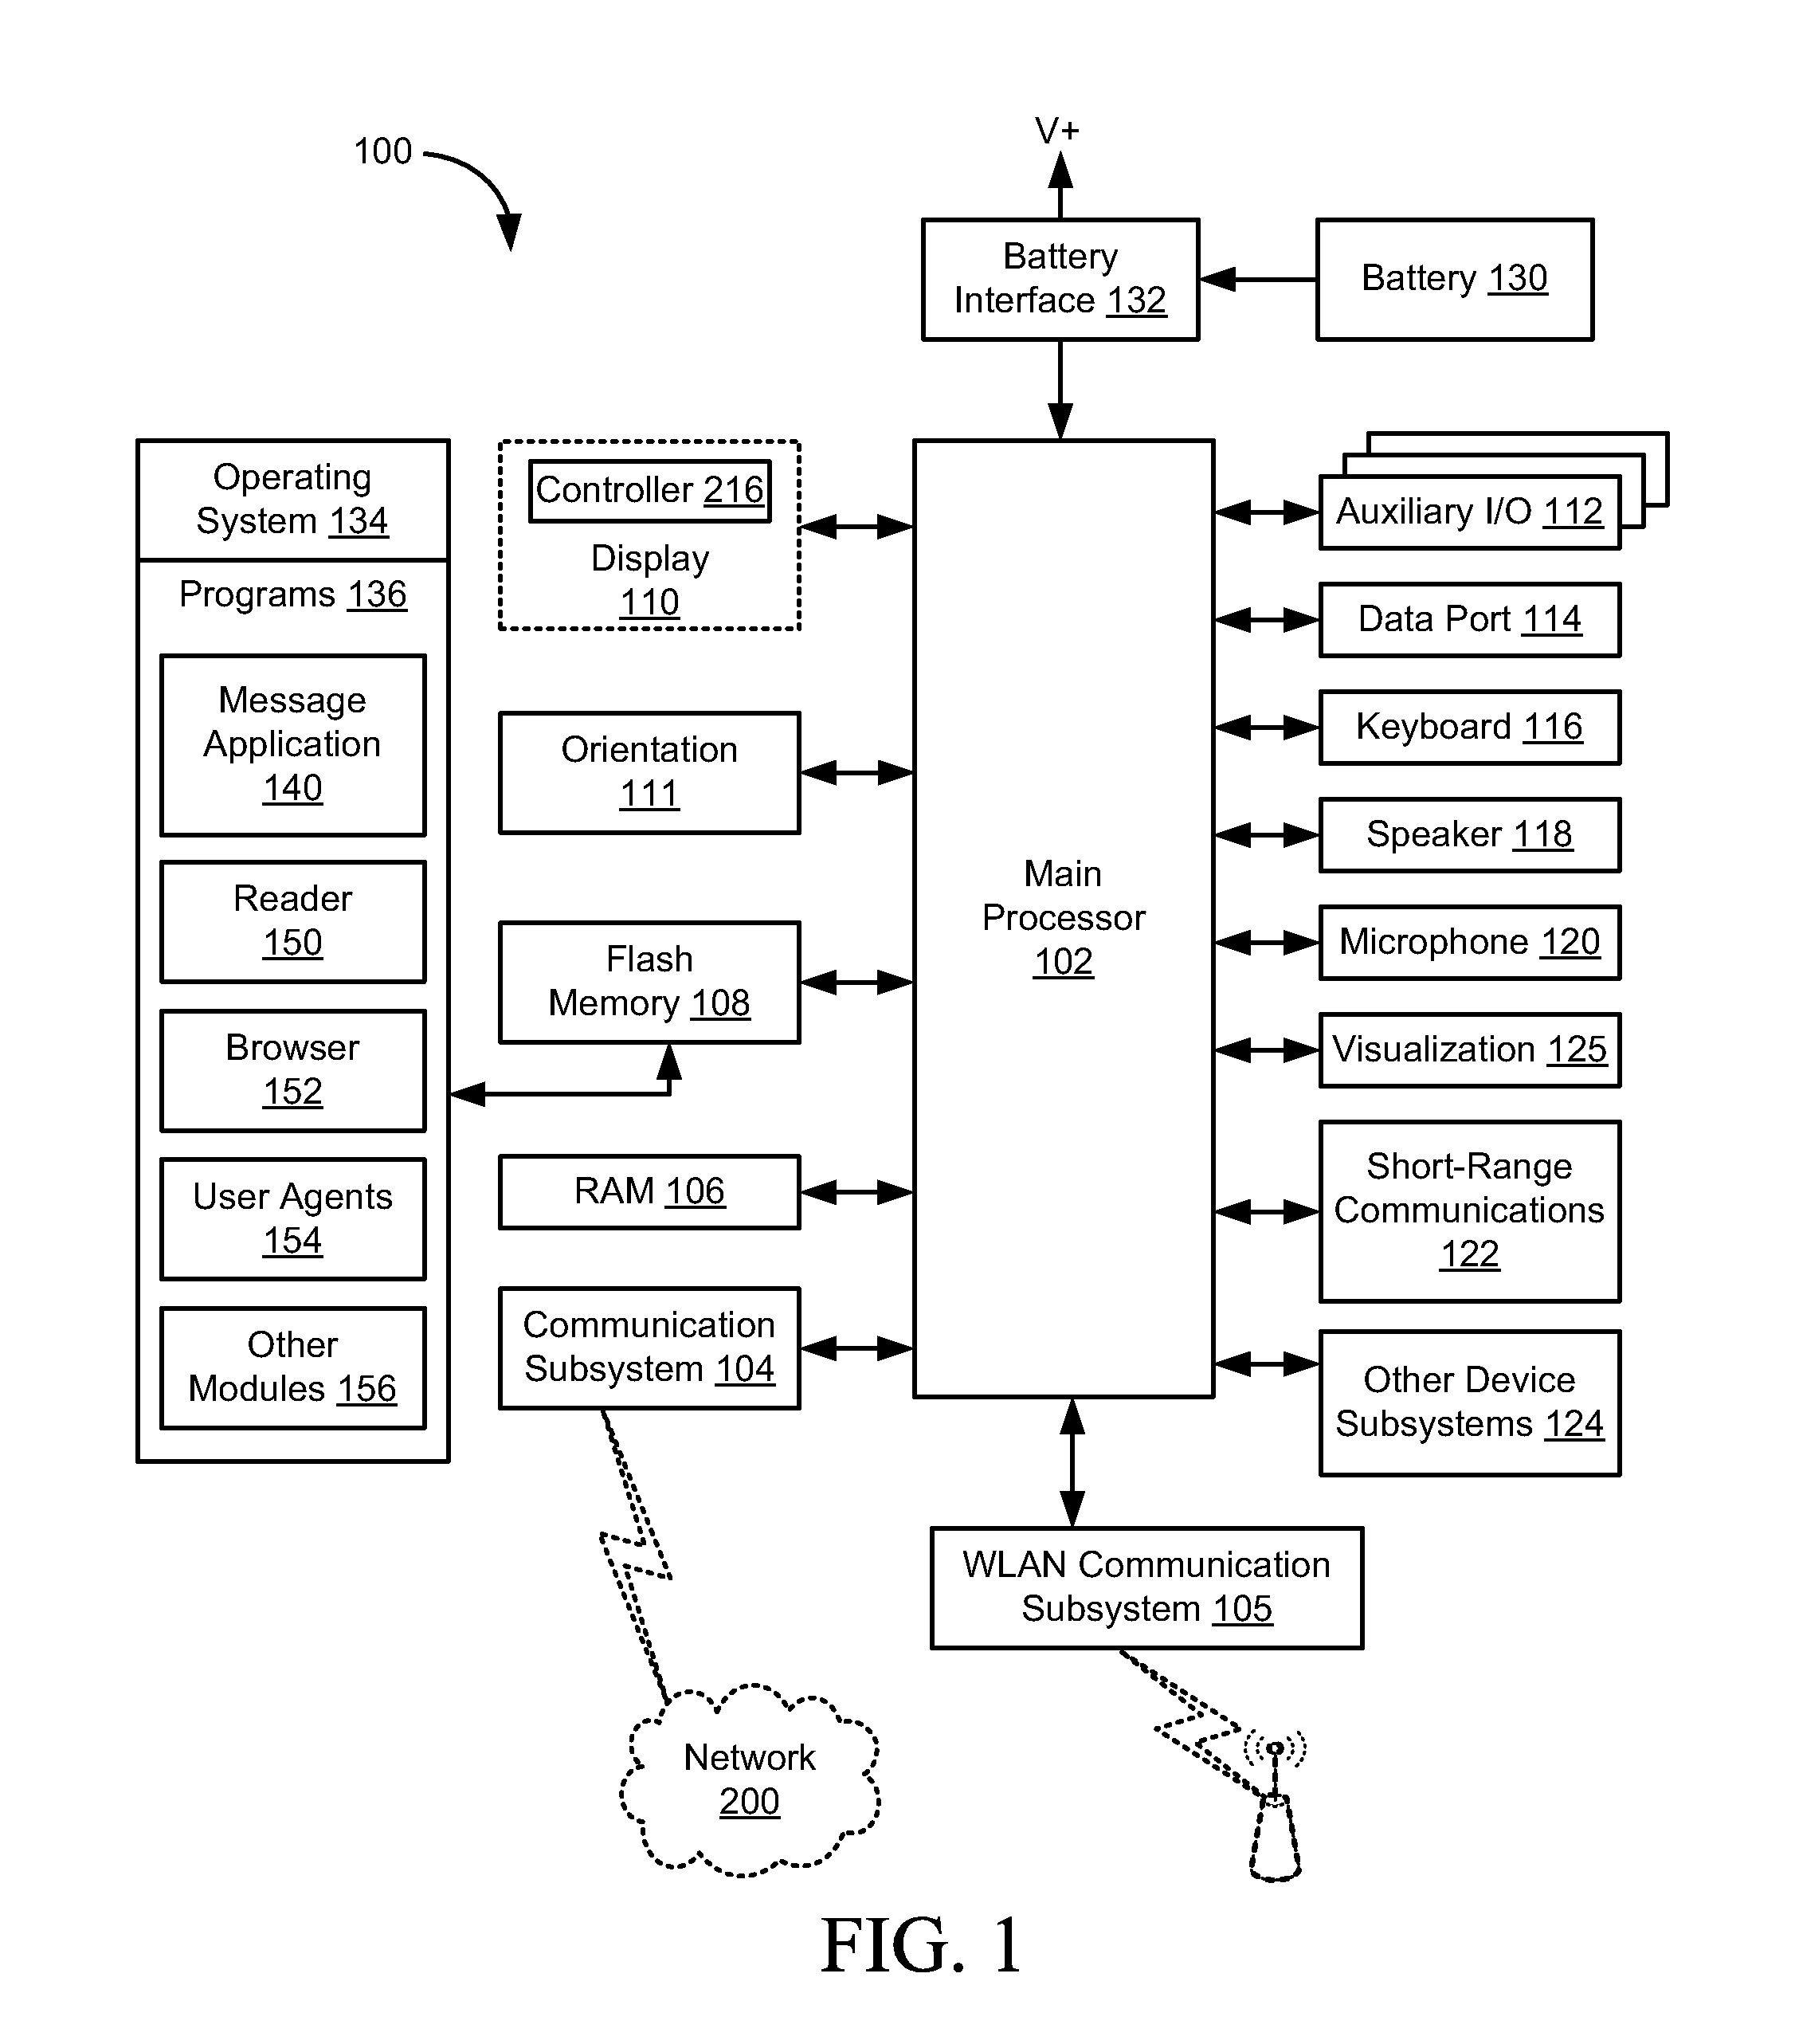 Orientation-dependent processing of input files by an electronic device